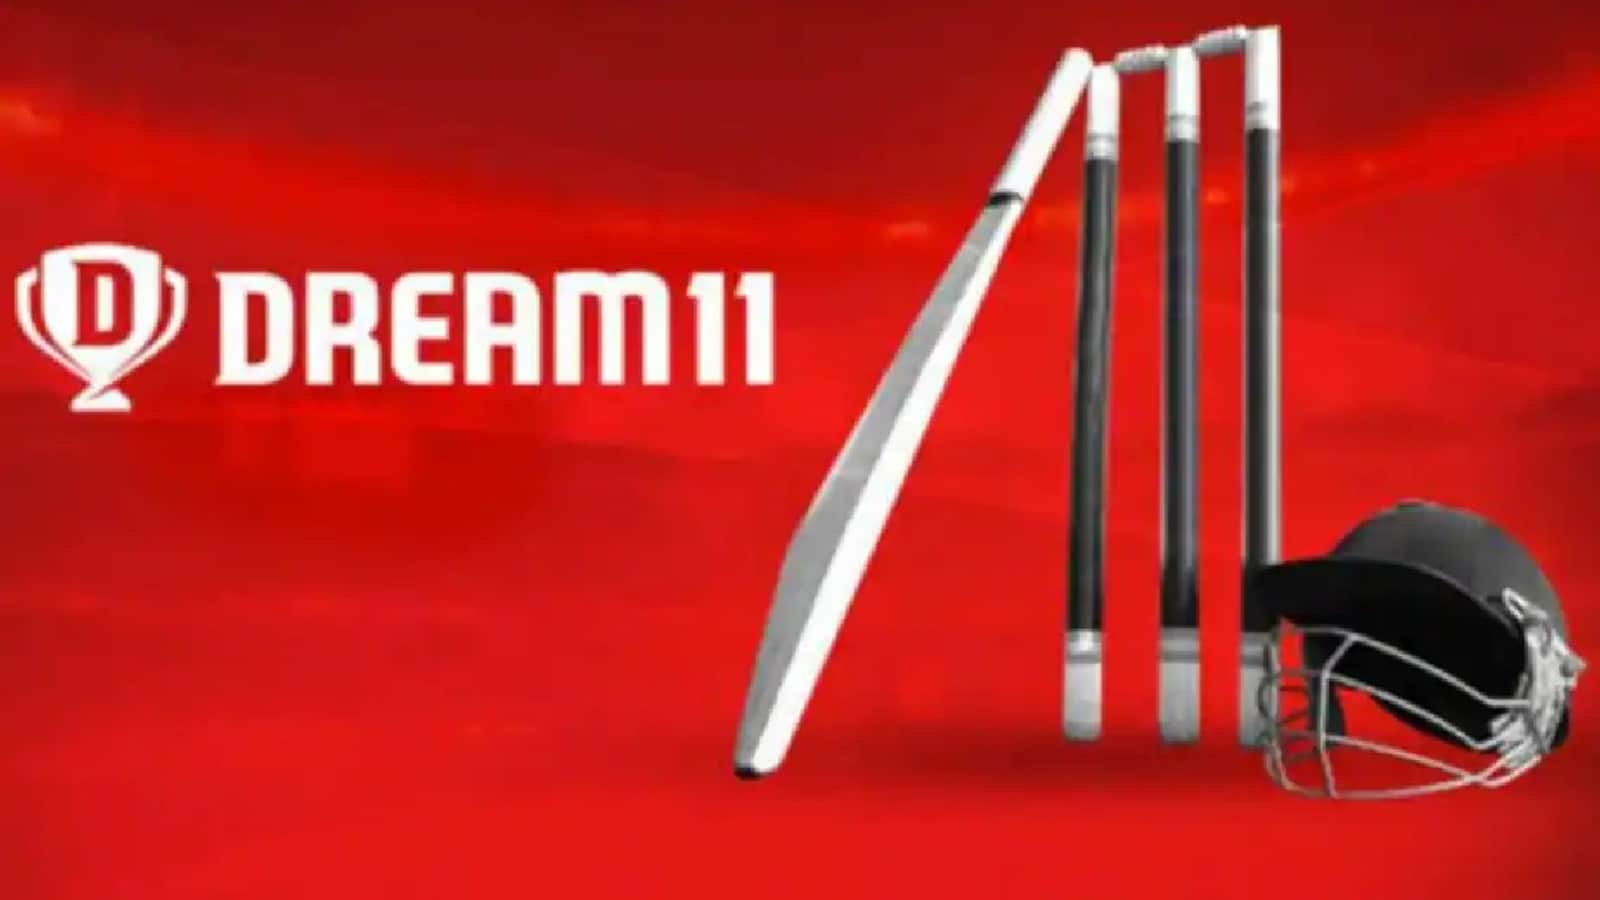 Dream11 becomes Indian cricket team's lead sponsor, replacing Byju's